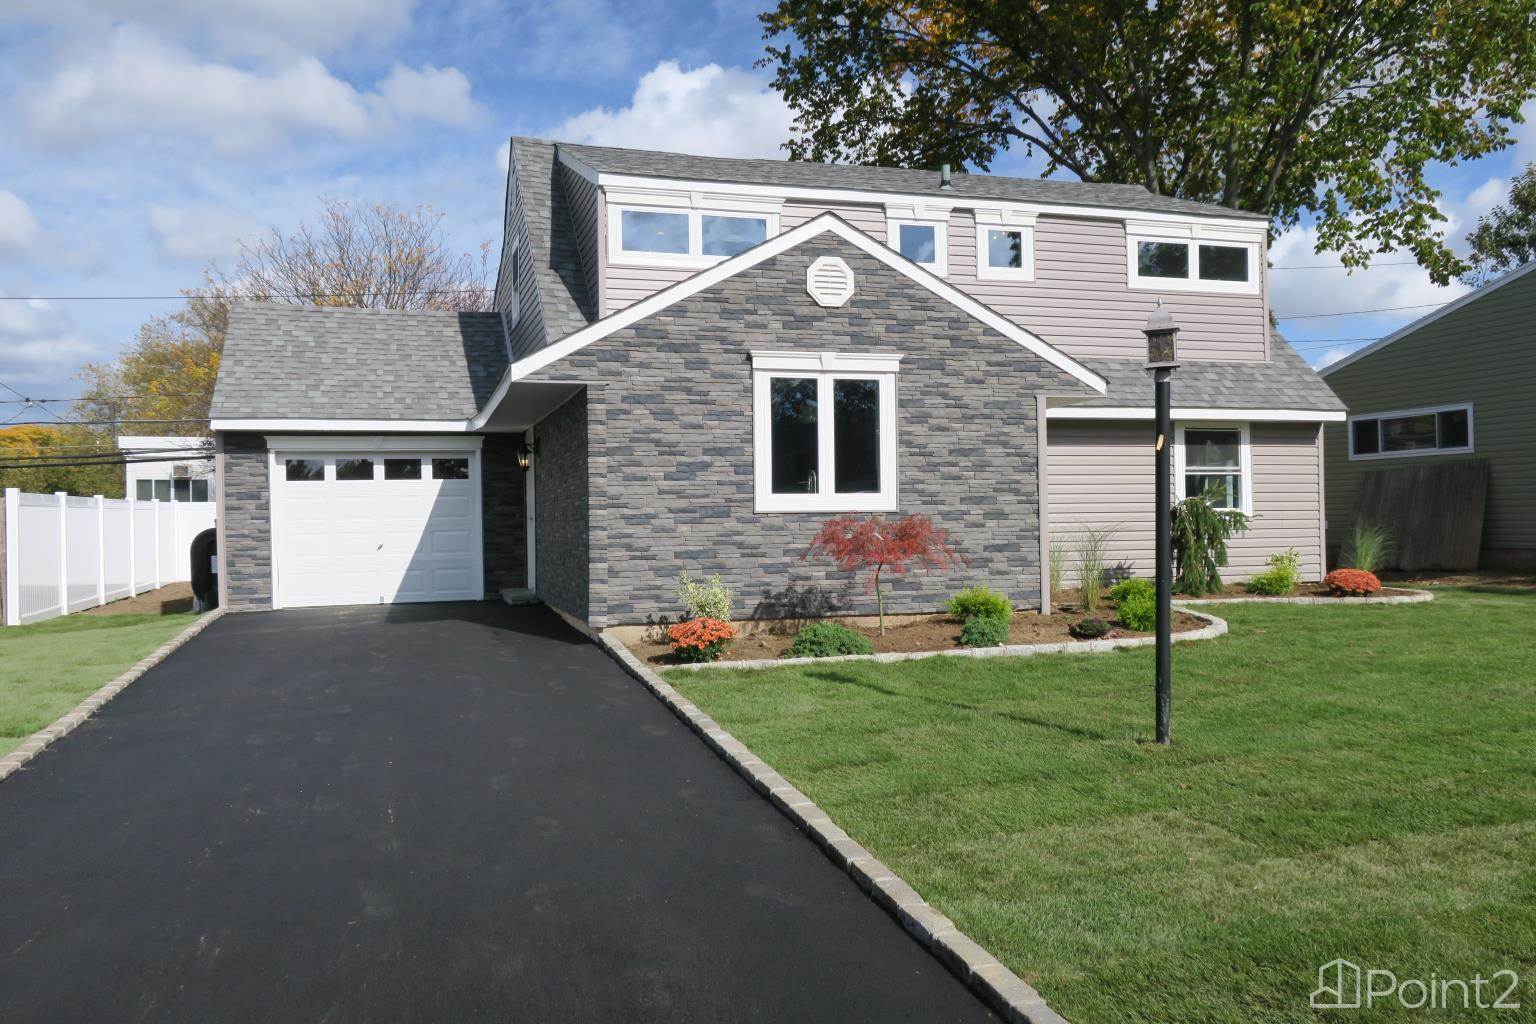 Levittown homes for sale - Homes for sale in Levittown NY - HomeGain